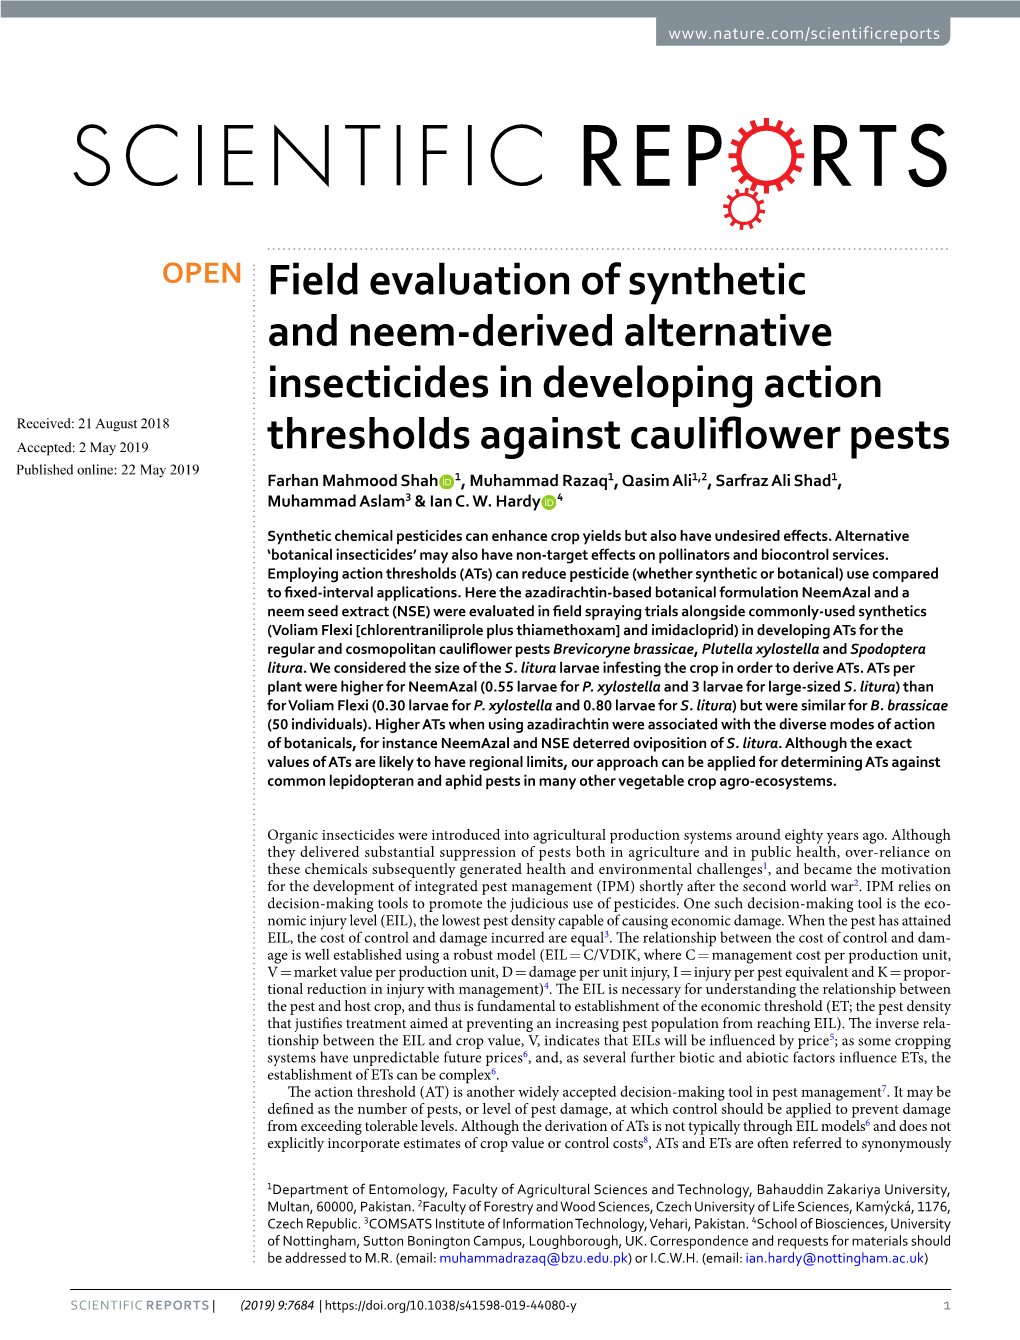 Field Evaluation of Synthetic and Neem-Derived Alternative Insecticides In